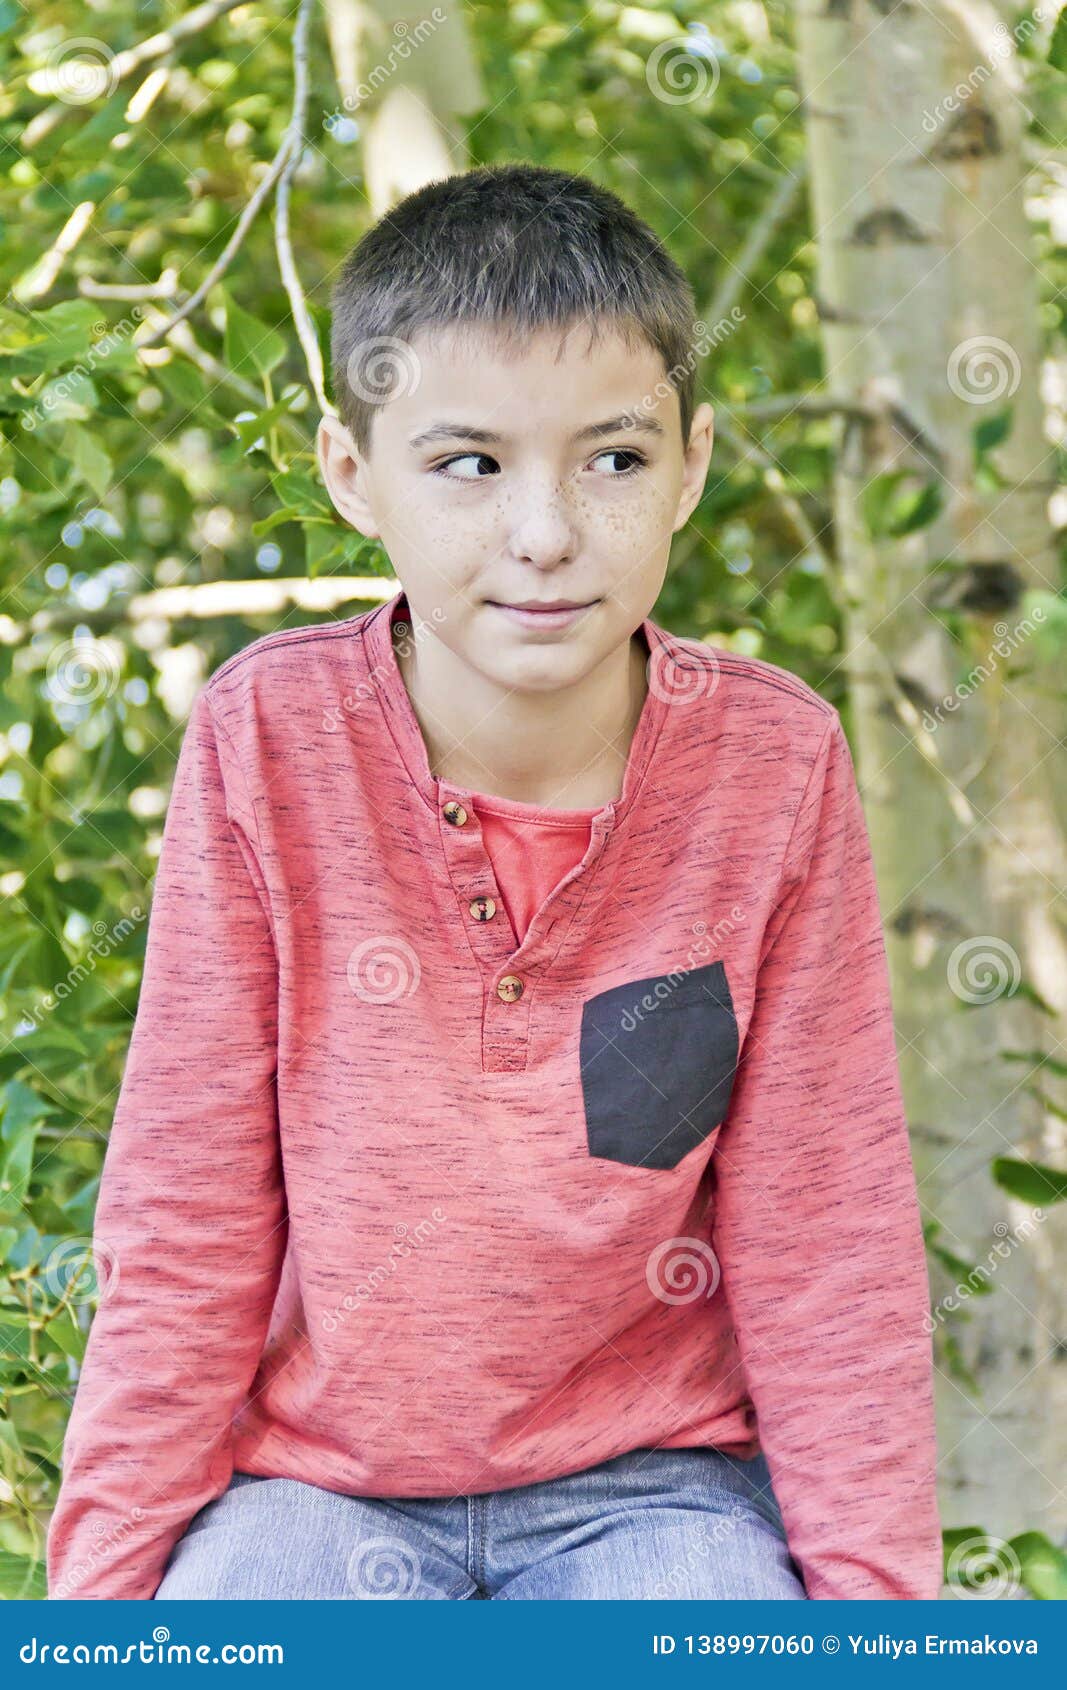 Teenager boy in pink stock photo. Image of fall, autumn - 138997060